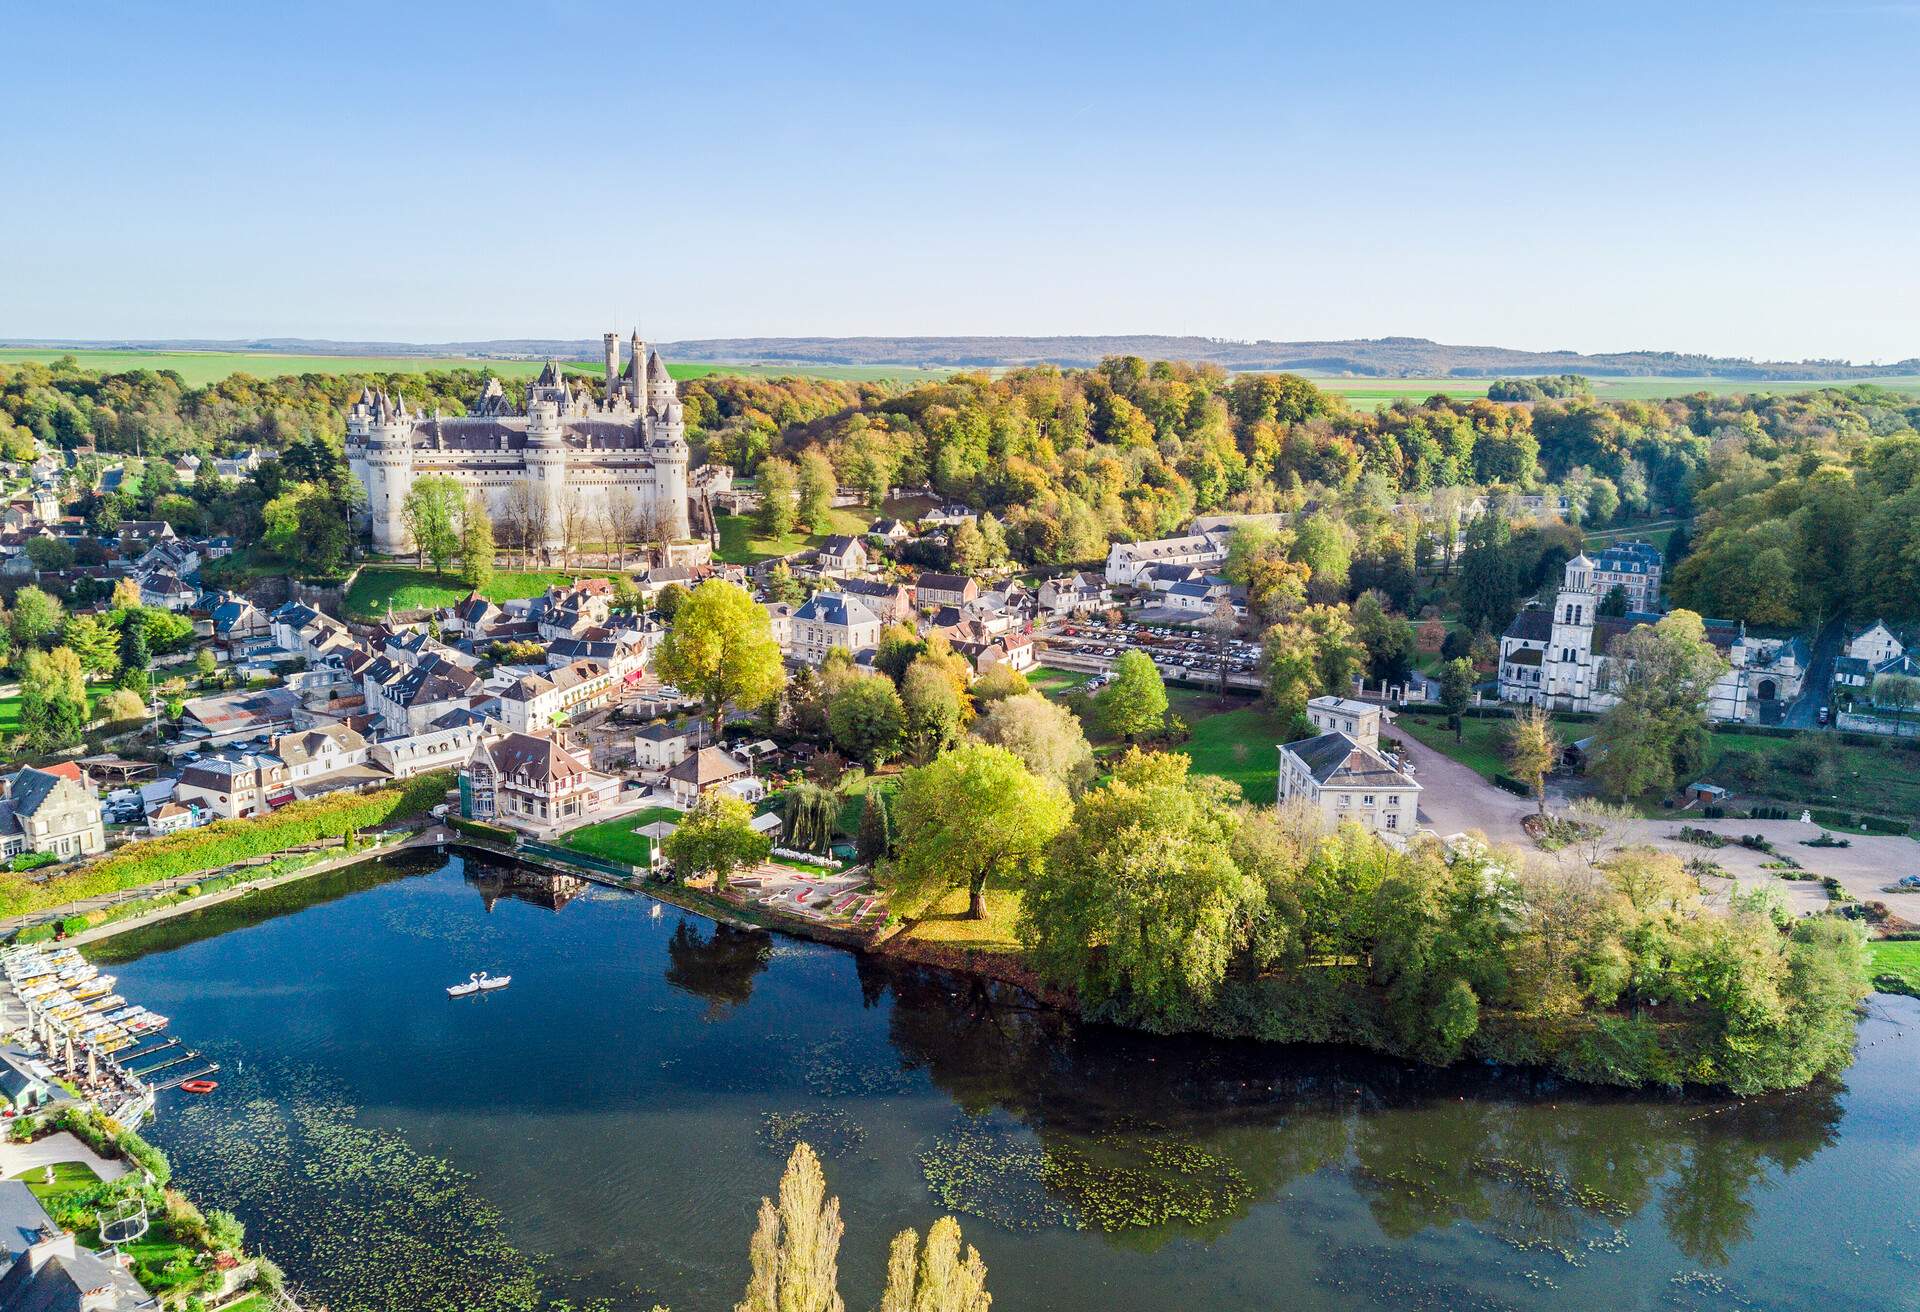 Amazing castle in Pierrefonds in natural surrounding, France